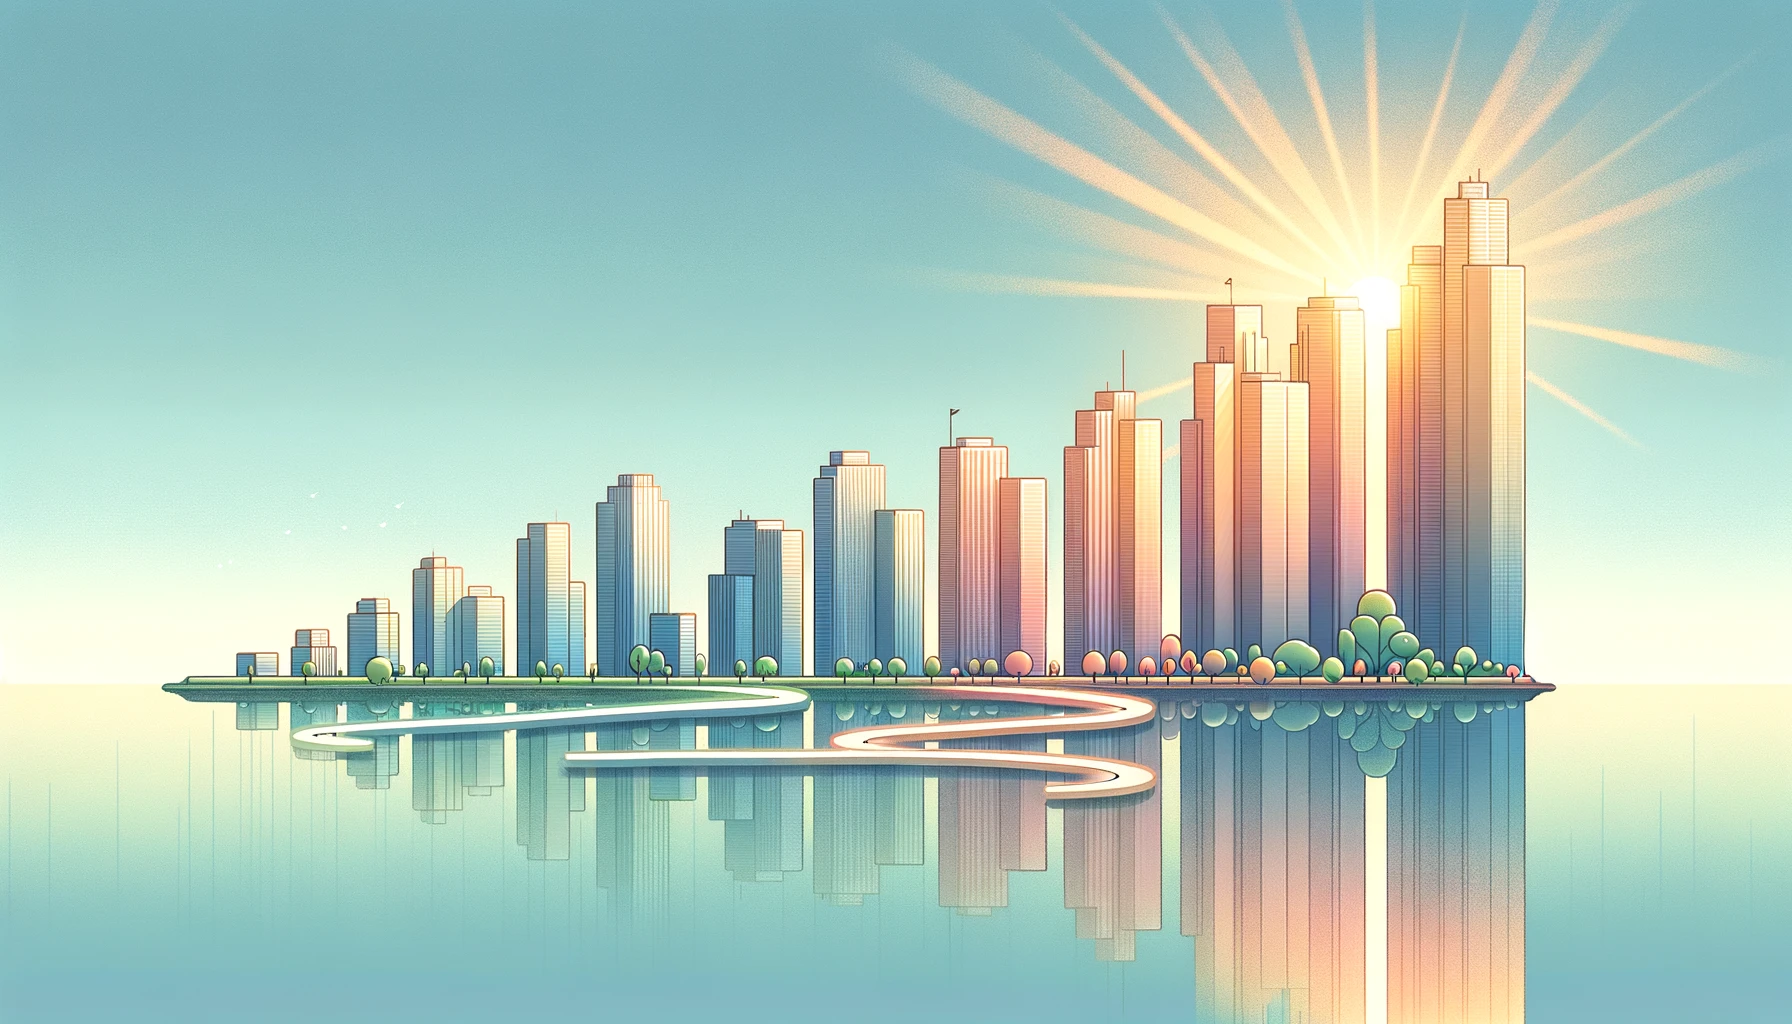 A wide, minimalist landscape of buildings transitioning from small structures to towering skyscrapers, representing business growth and scaling against a backdrop of dawn to midday, symbolizing business analysis and market competition.